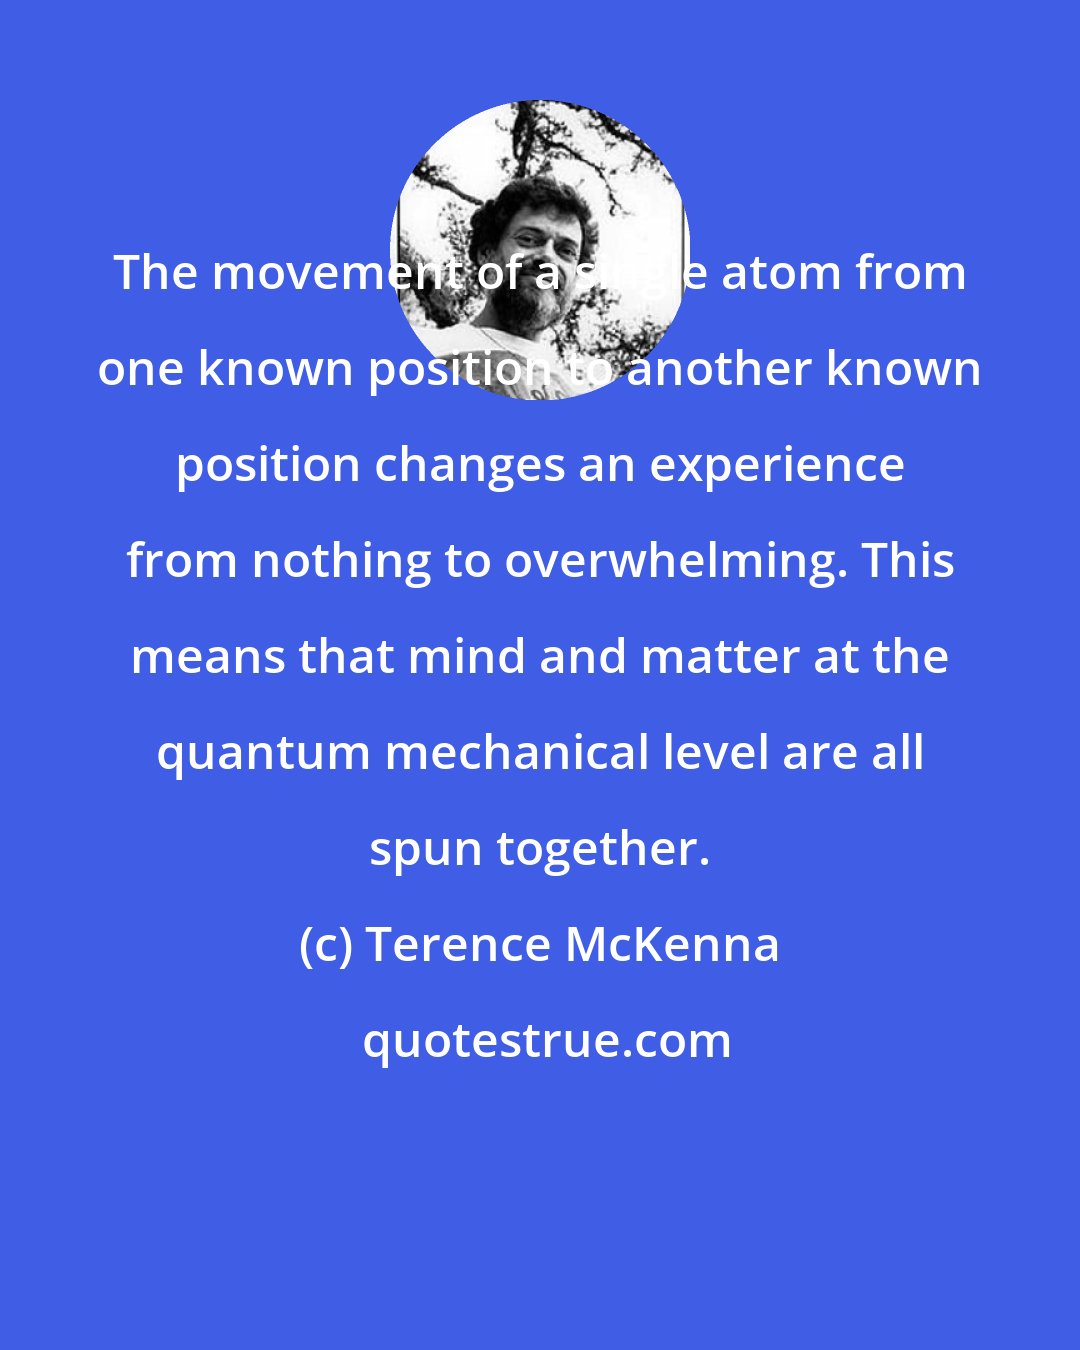 Terence McKenna: The movement of a single atom from one known position to another known position changes an experience from nothing to overwhelming. This means that mind and matter at the quantum mechanical level are all spun together.